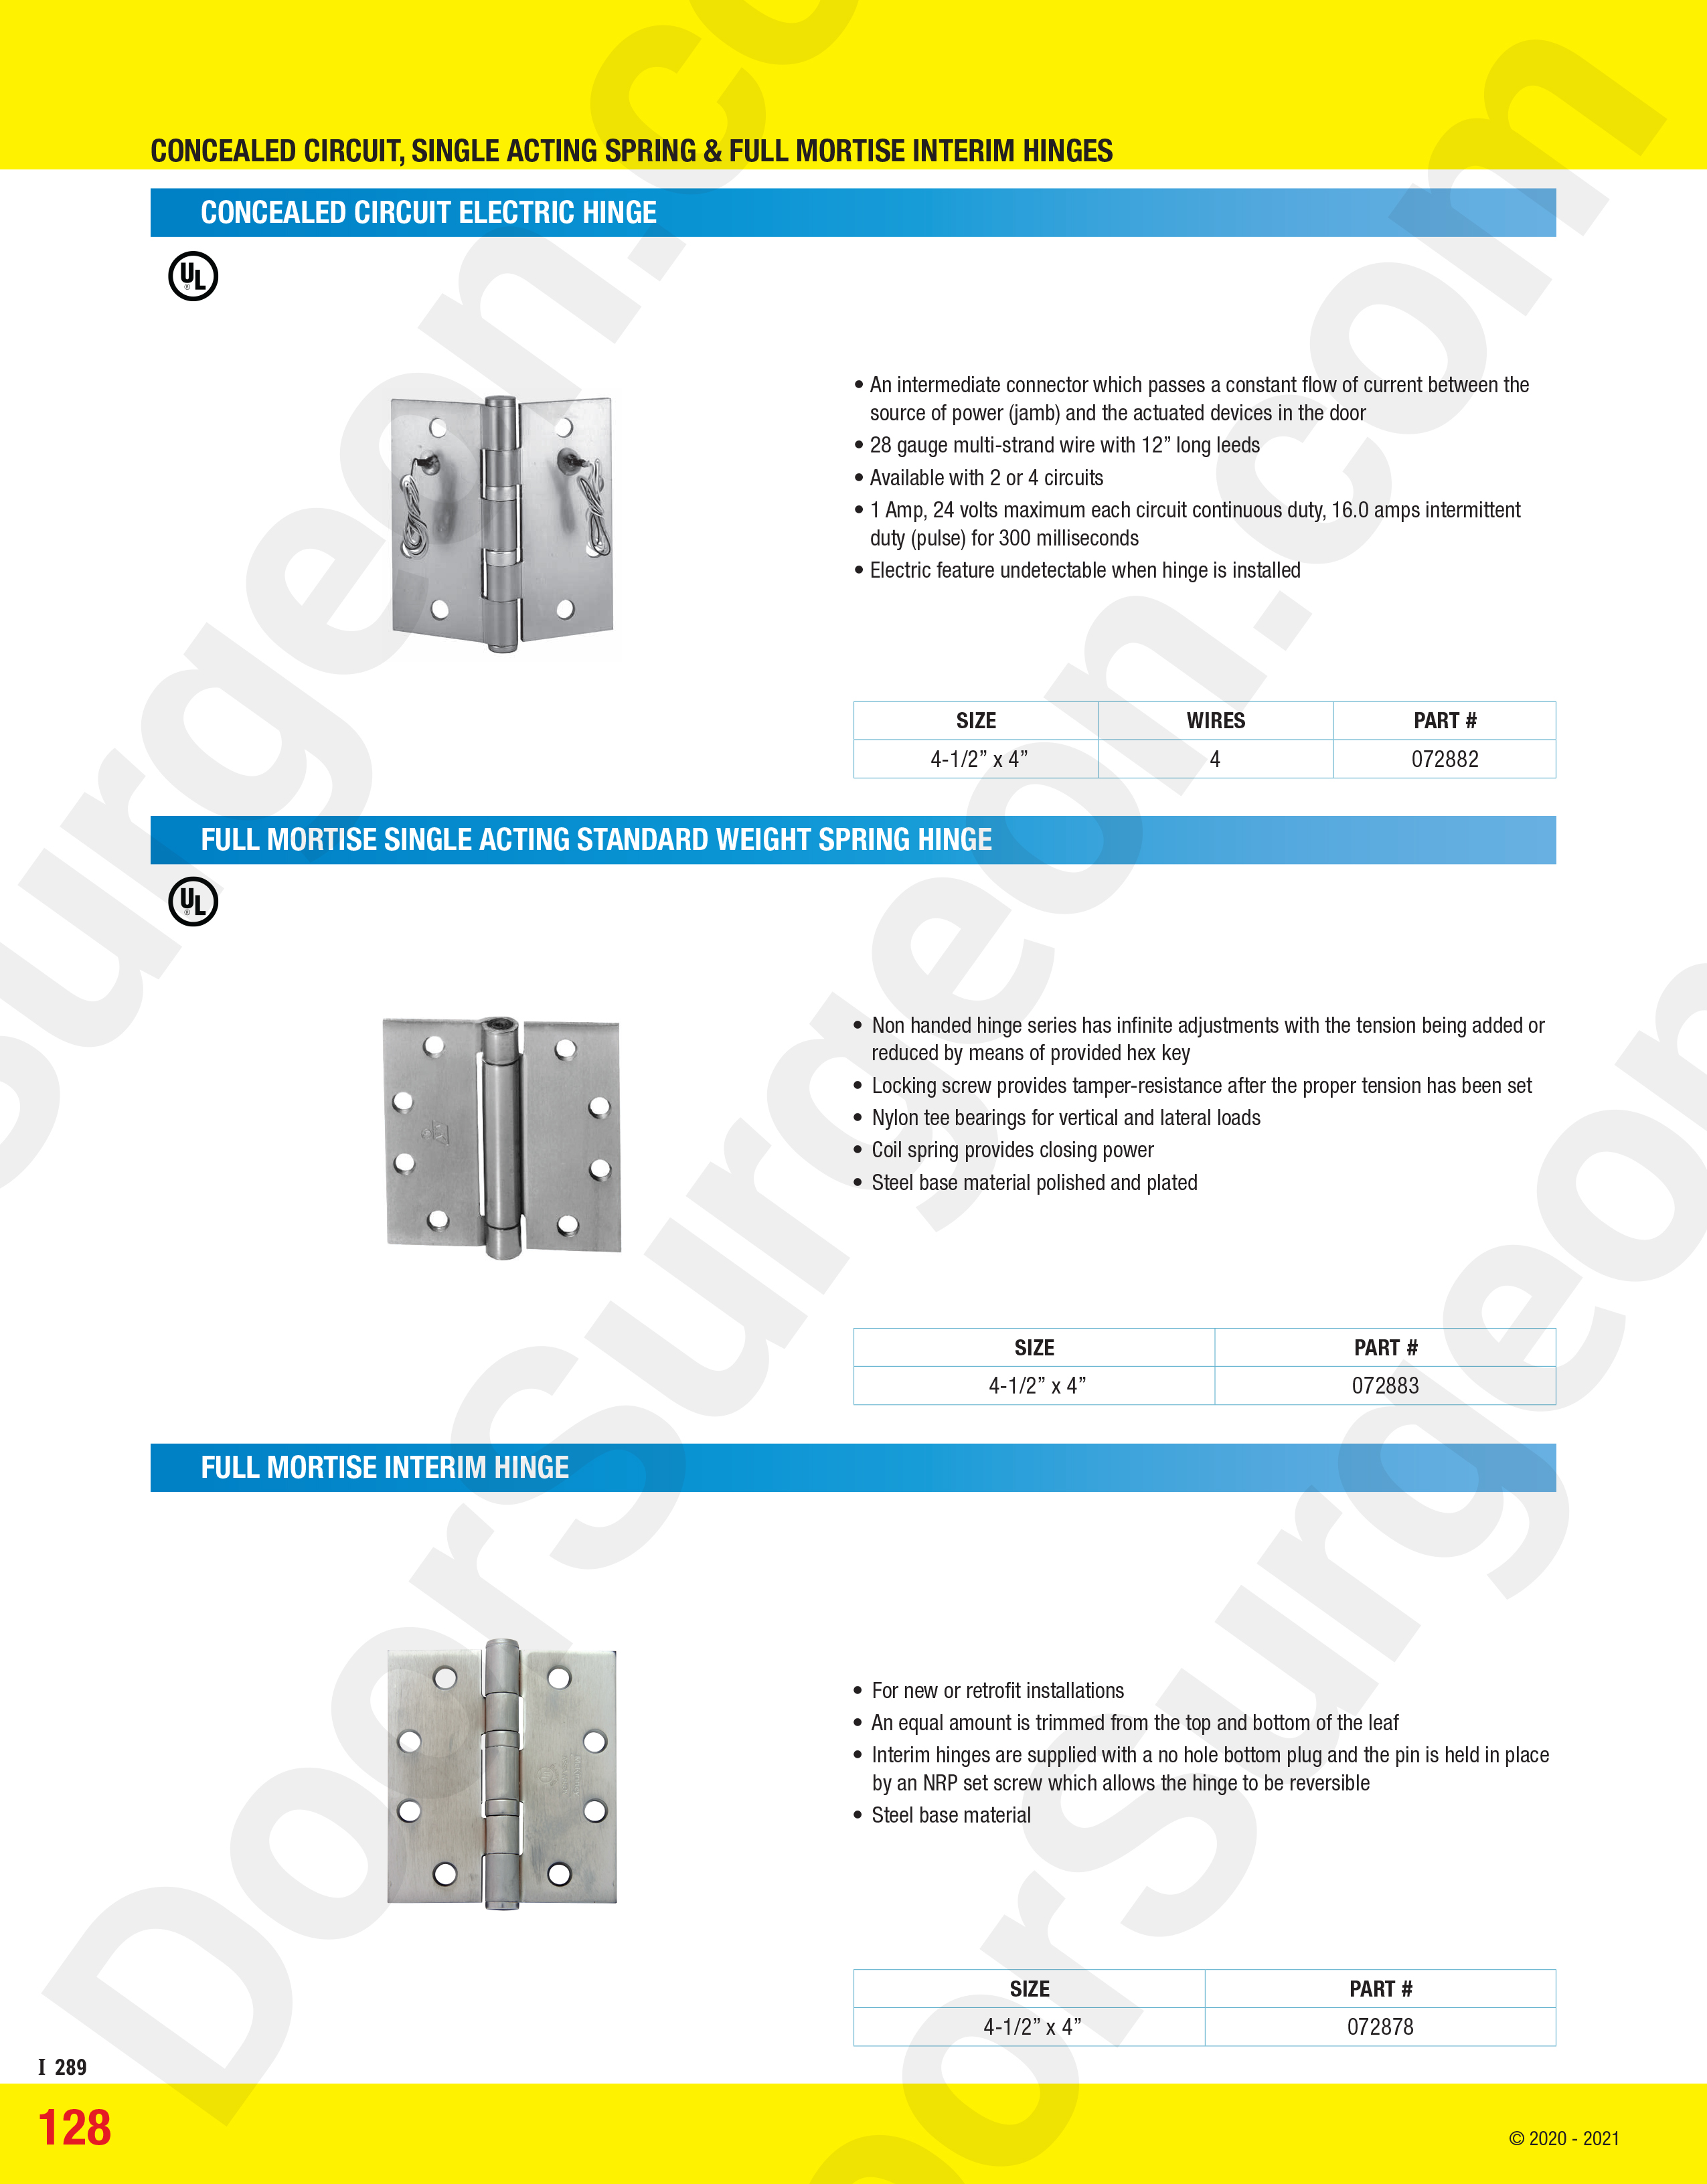 Door Surgeon carry Concealed circuit single acting spring and full mortise interim hinges.